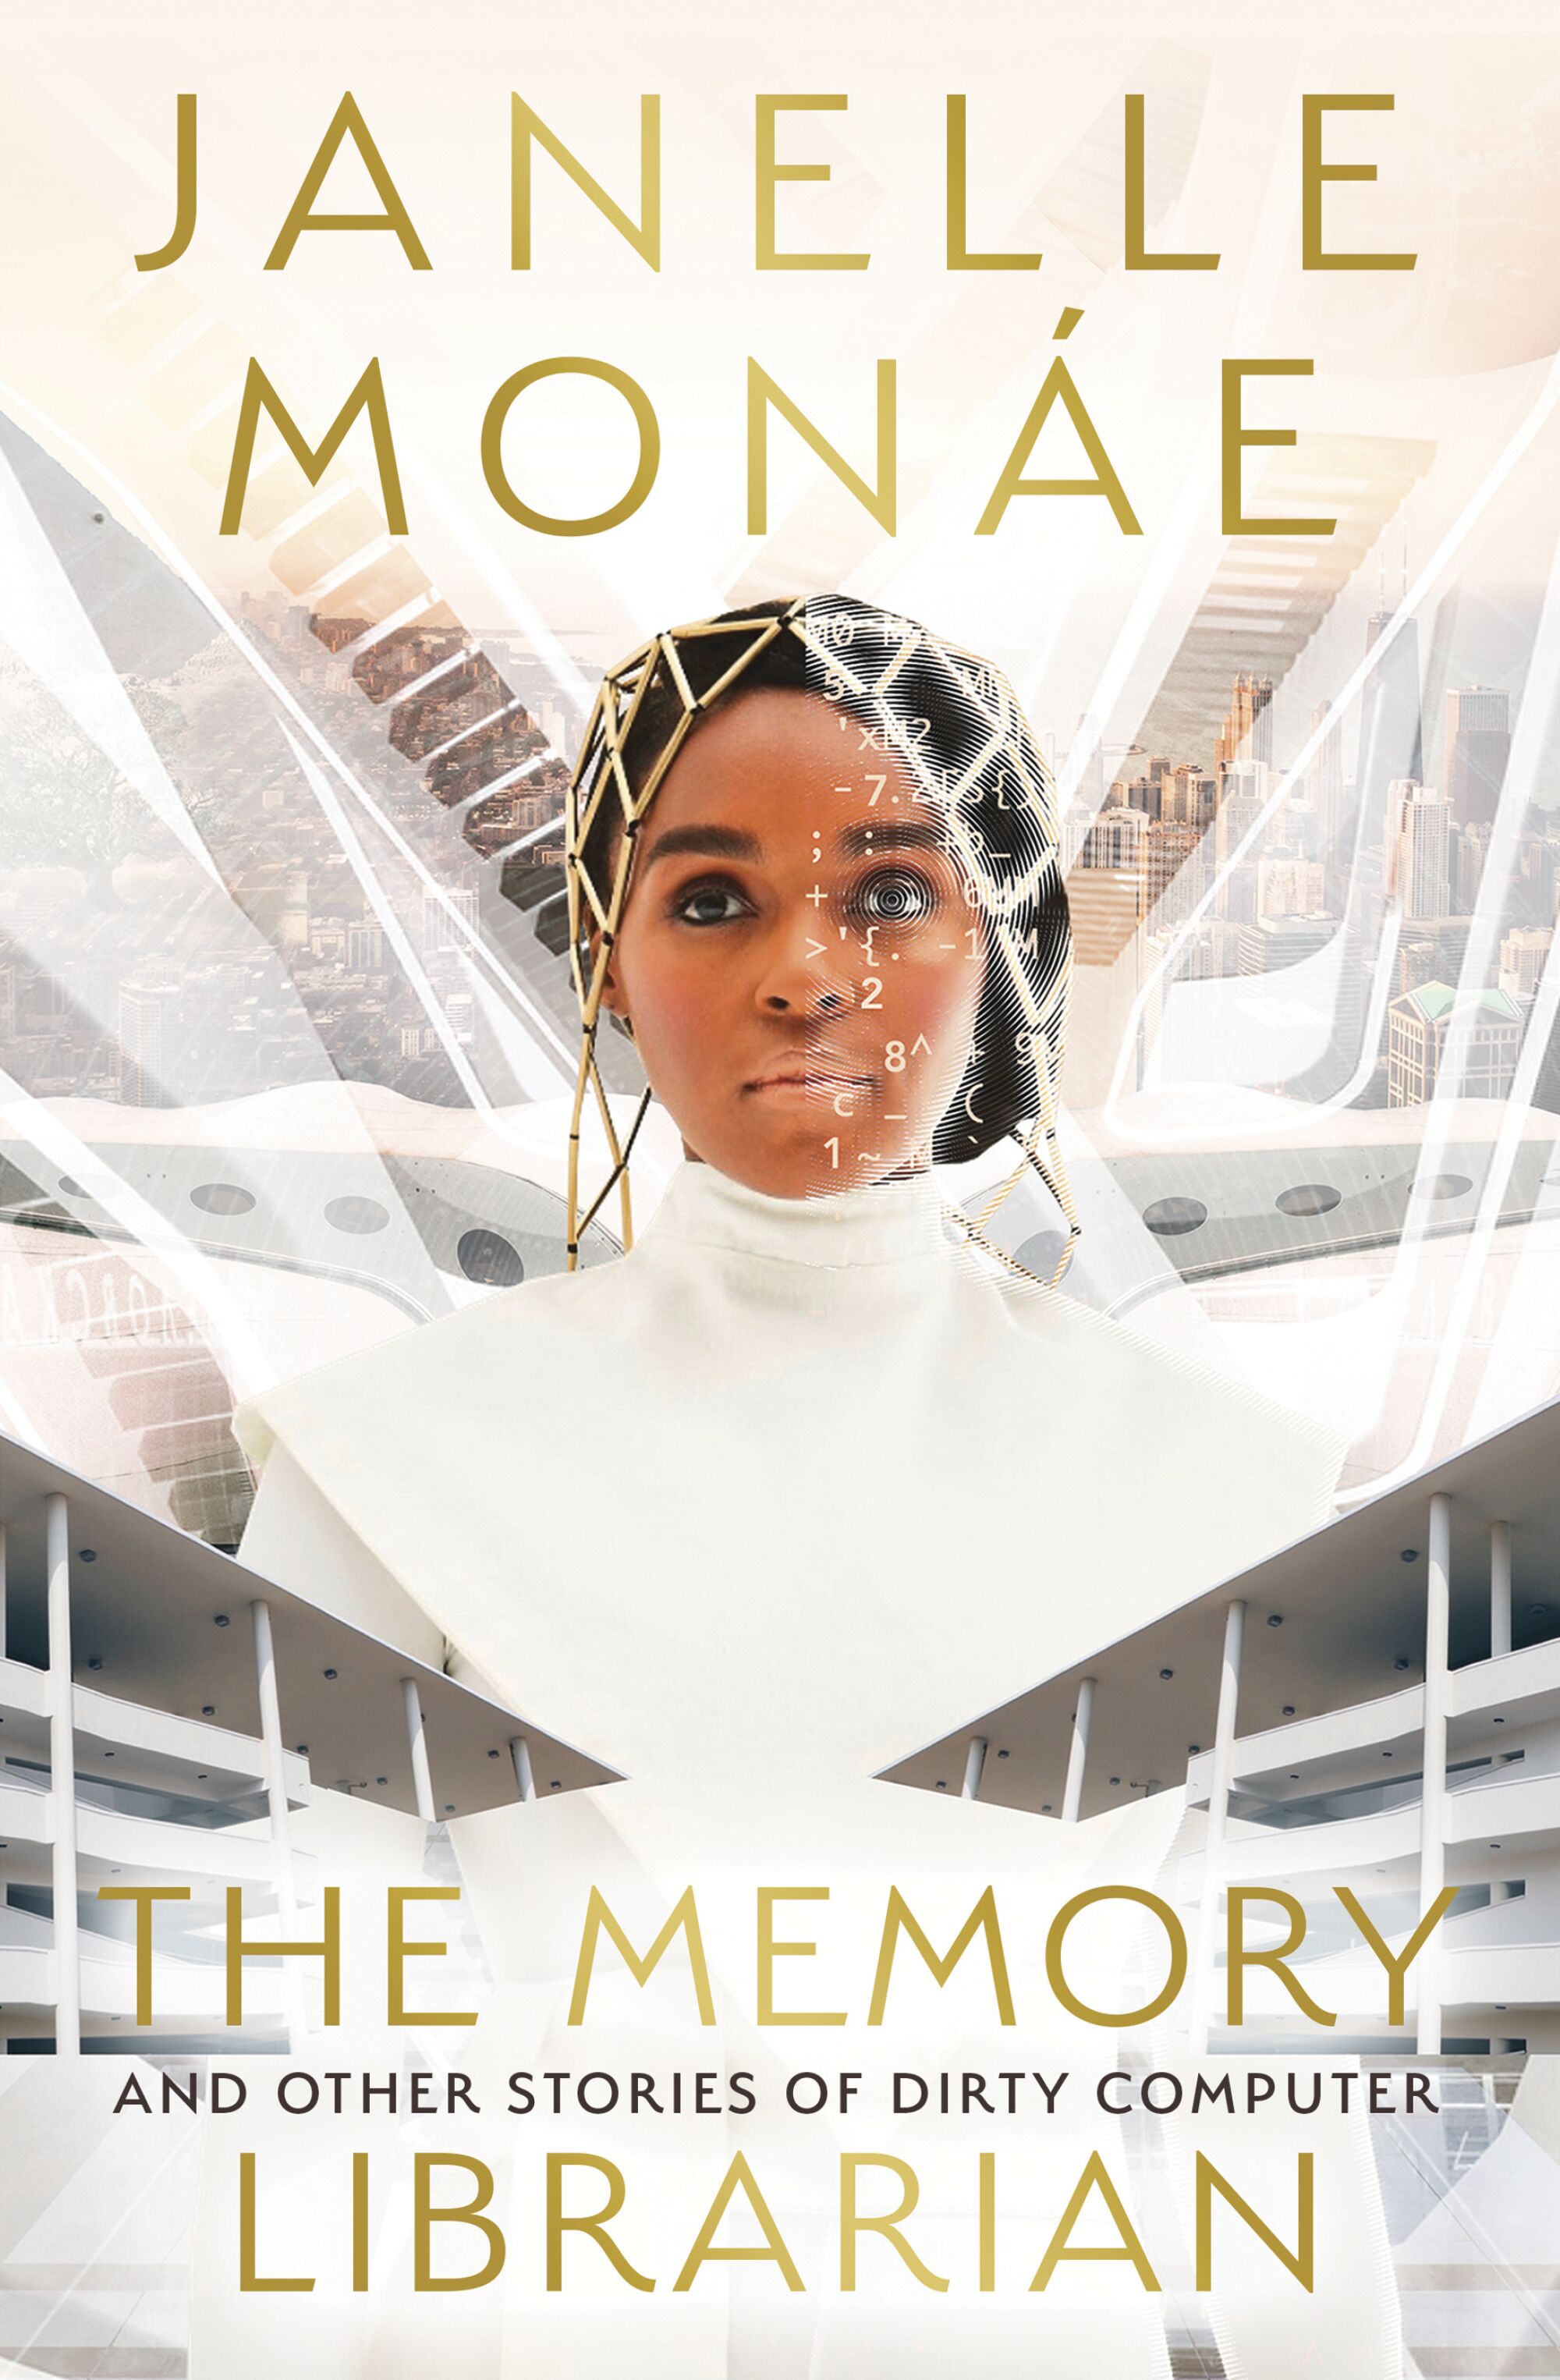 a woman in a futuristic outfit on the cover of "The Librarian of Memory and Other Dirty Computer Stories" by Janelle Monae.